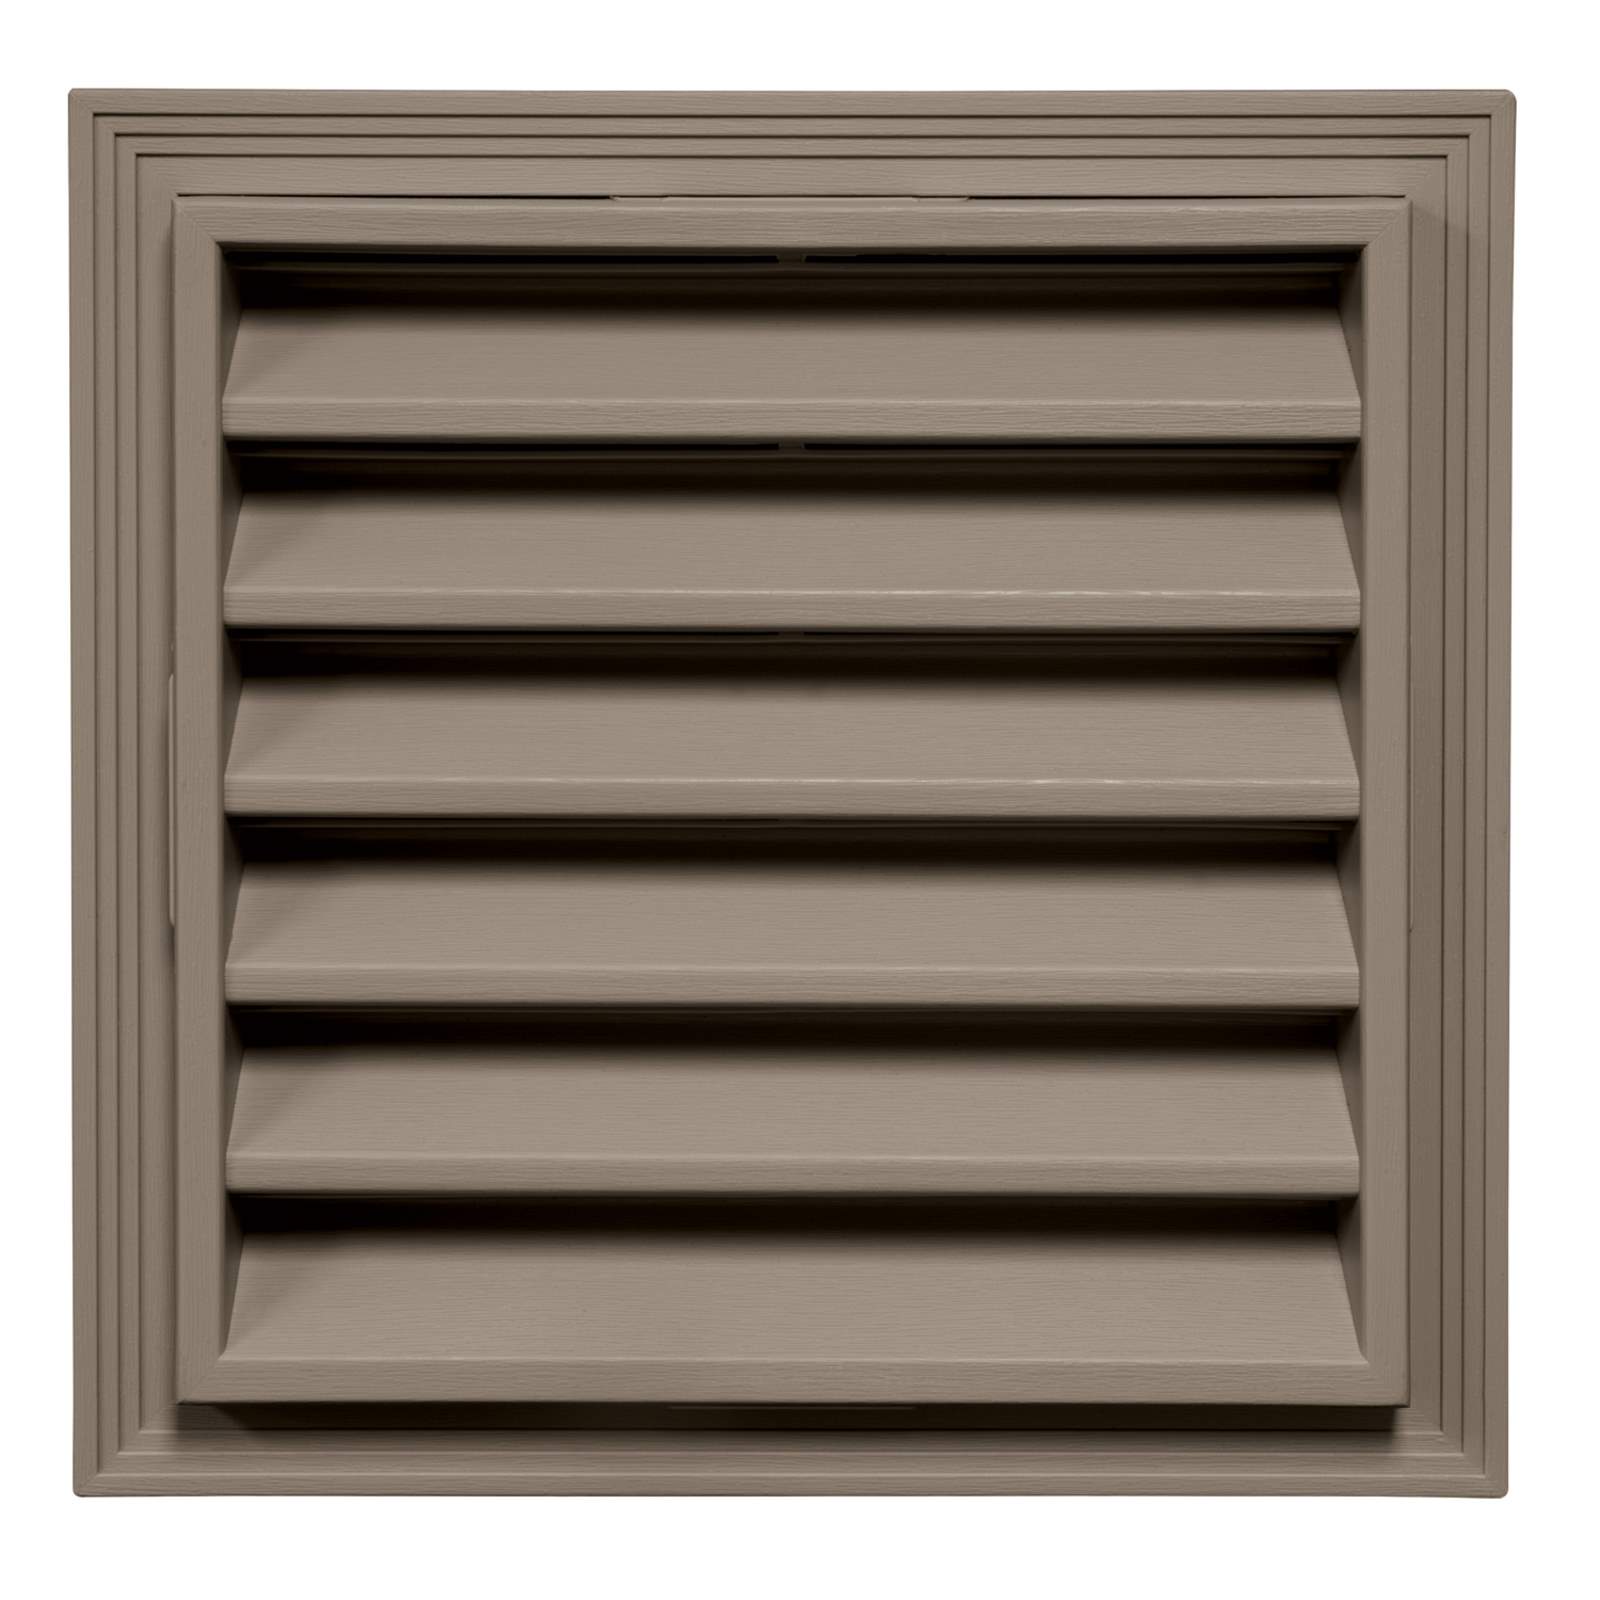 Mid America 12 Inch Square Vinyl Gable Vents (In Stock Now)